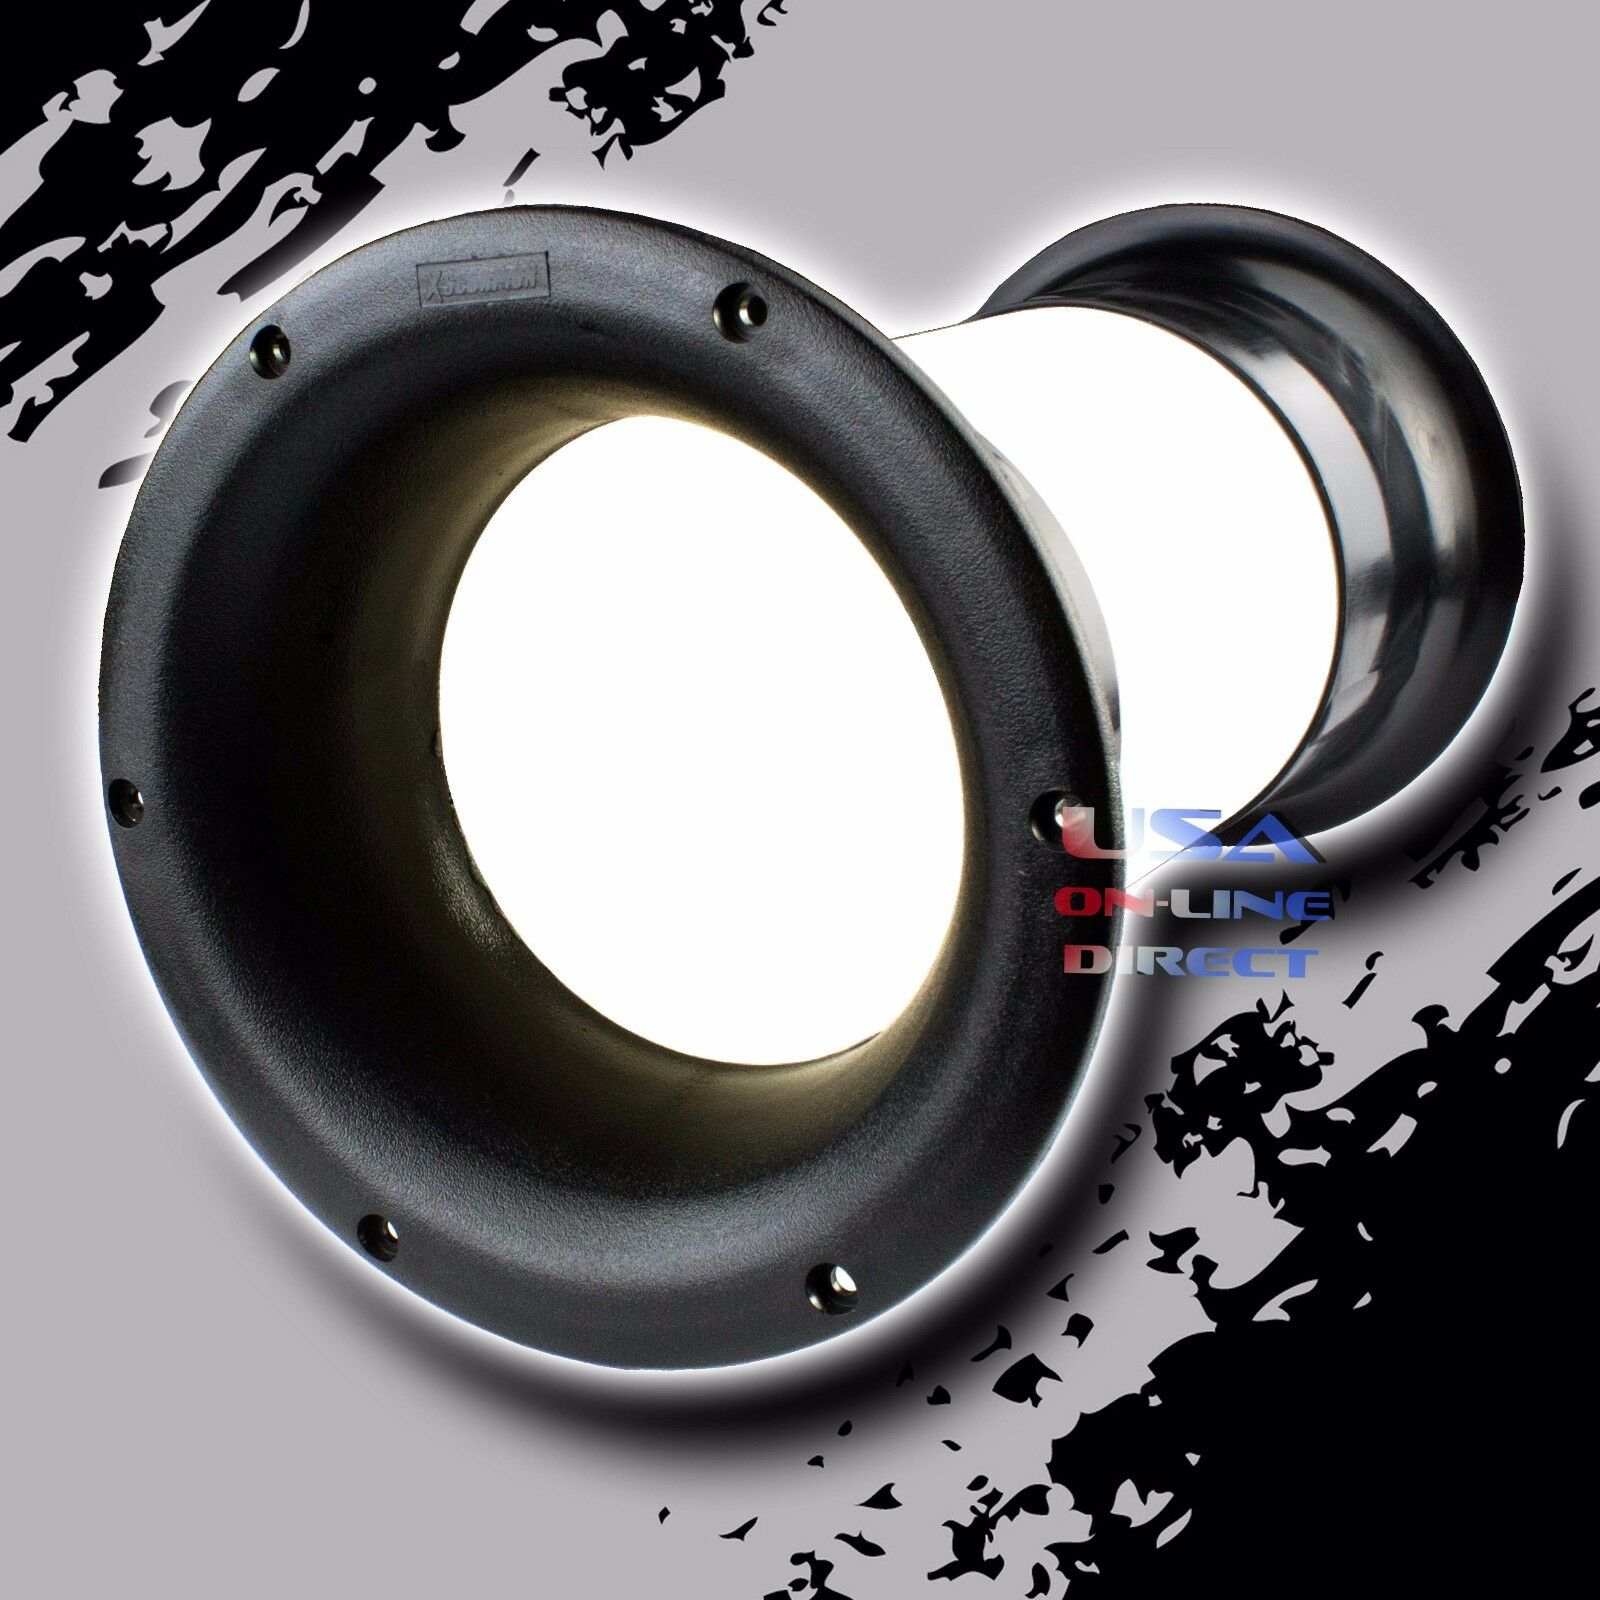 High Quality Molded 4" X 10" Aero-port For 10"-18" Sub-woofer Bass Enclosure Us